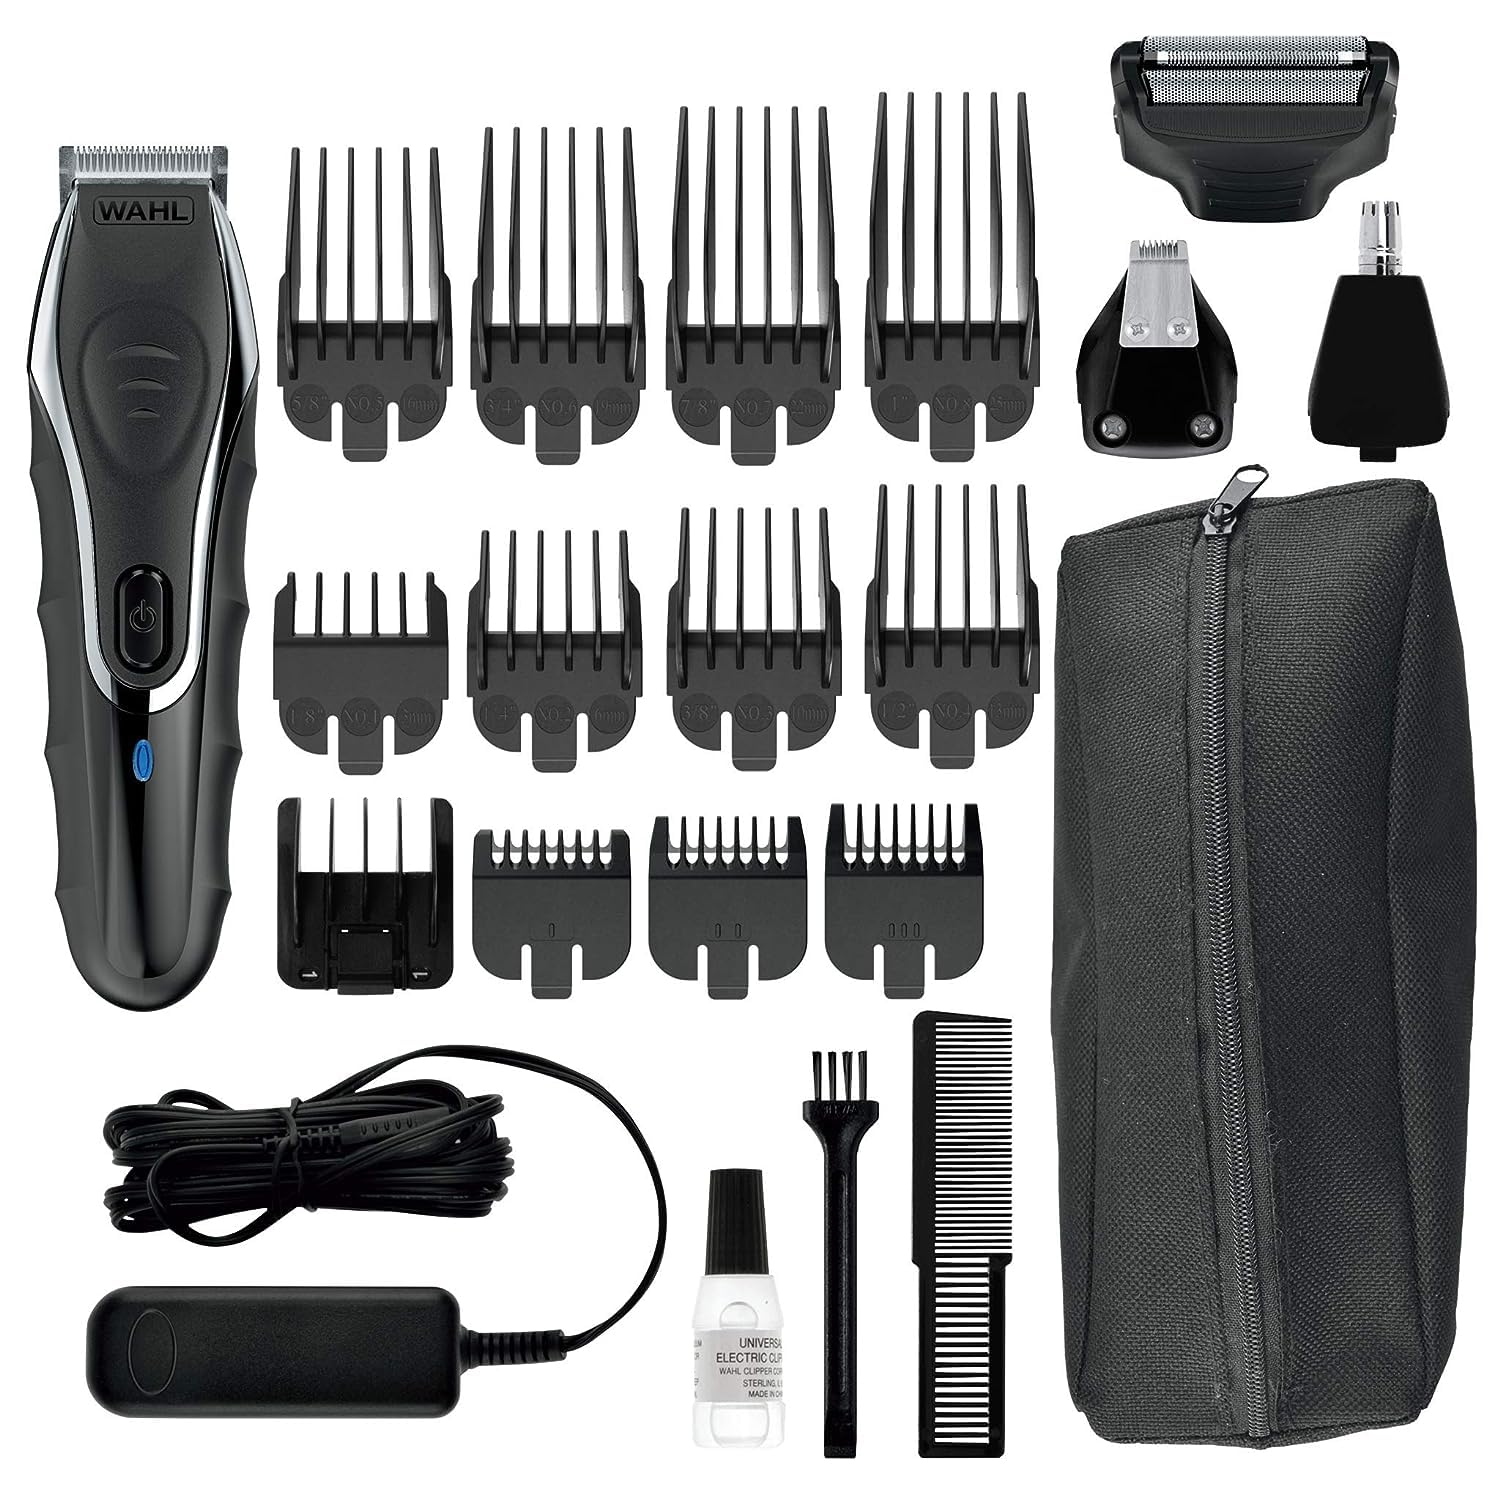 WAHL Aqua Groom Rechargeable Trimmer Kit, Showerproof Lithium Ion Trimmer, Foil Shaver and Detailer, 12 Combs for different beard haircutting lengths, 3 hours Run Time, 09899-027